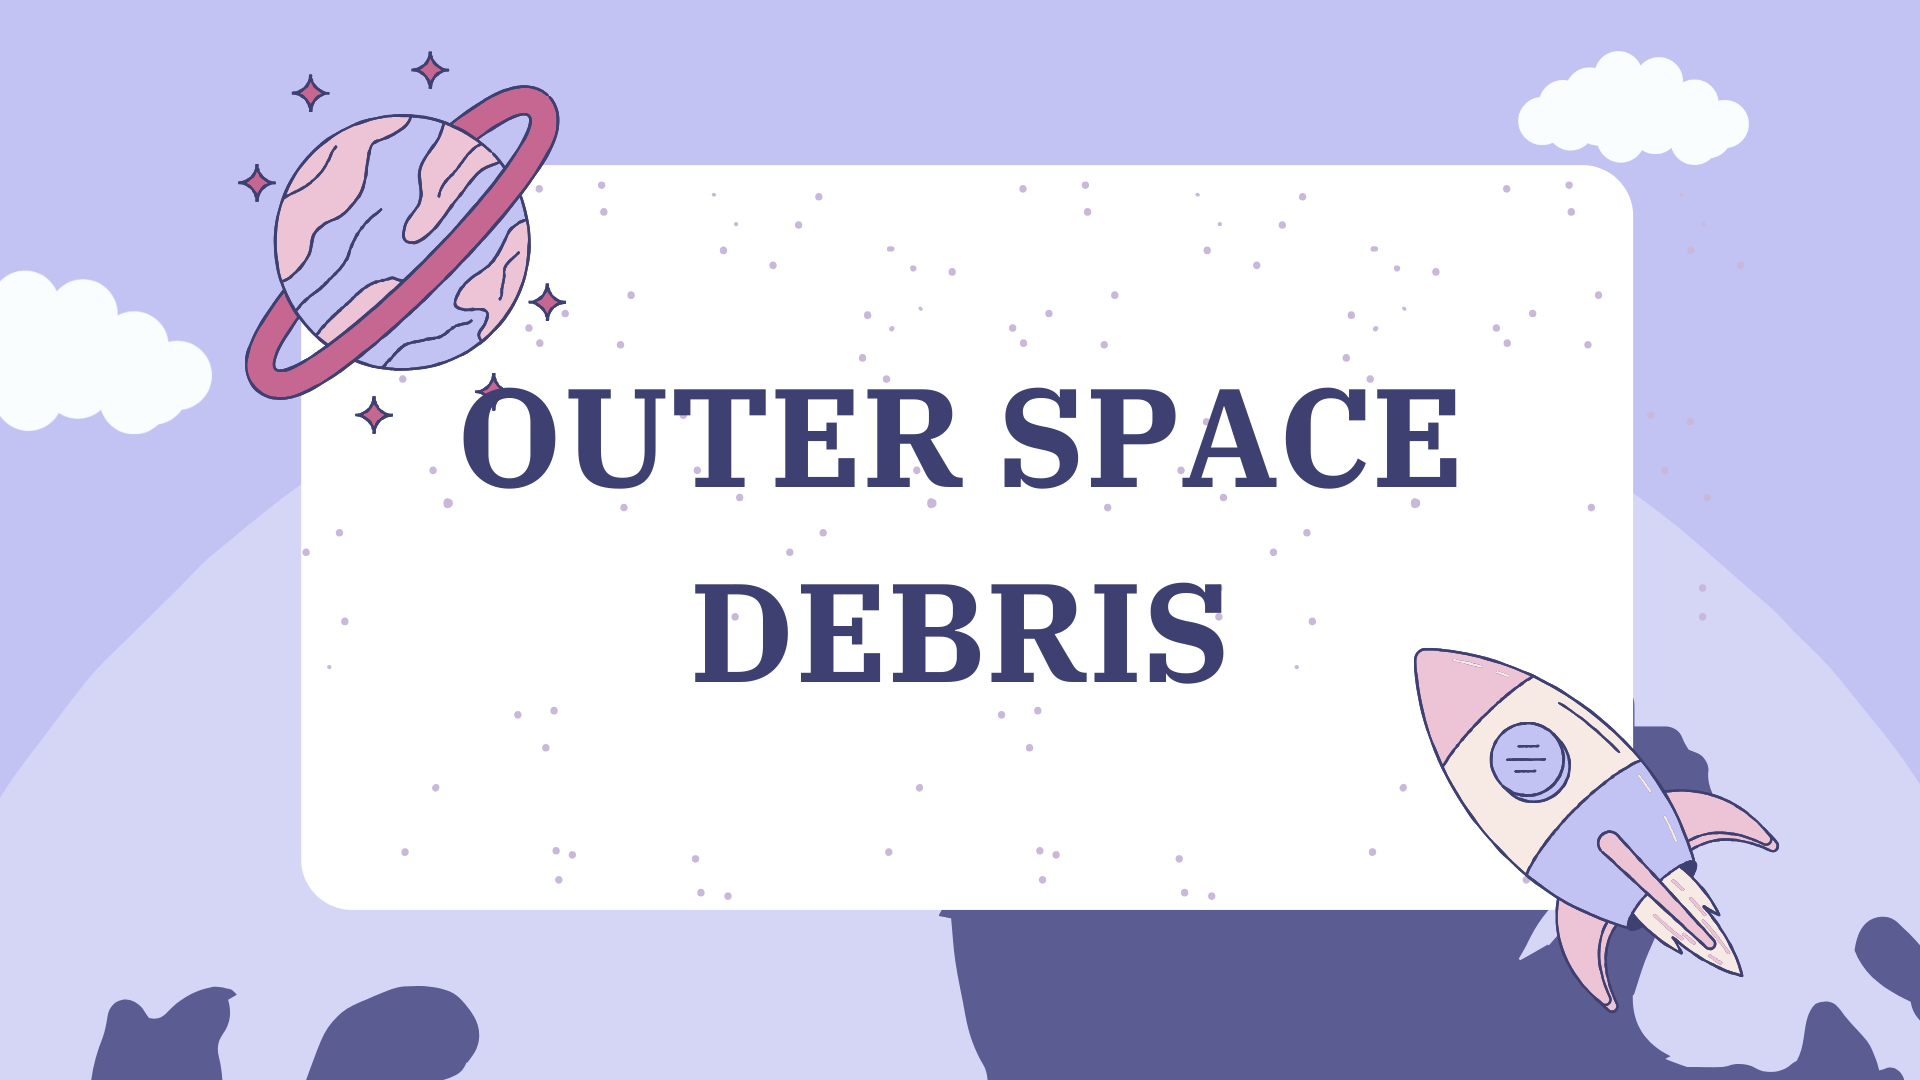 7 ways to combat Outer Space Debris